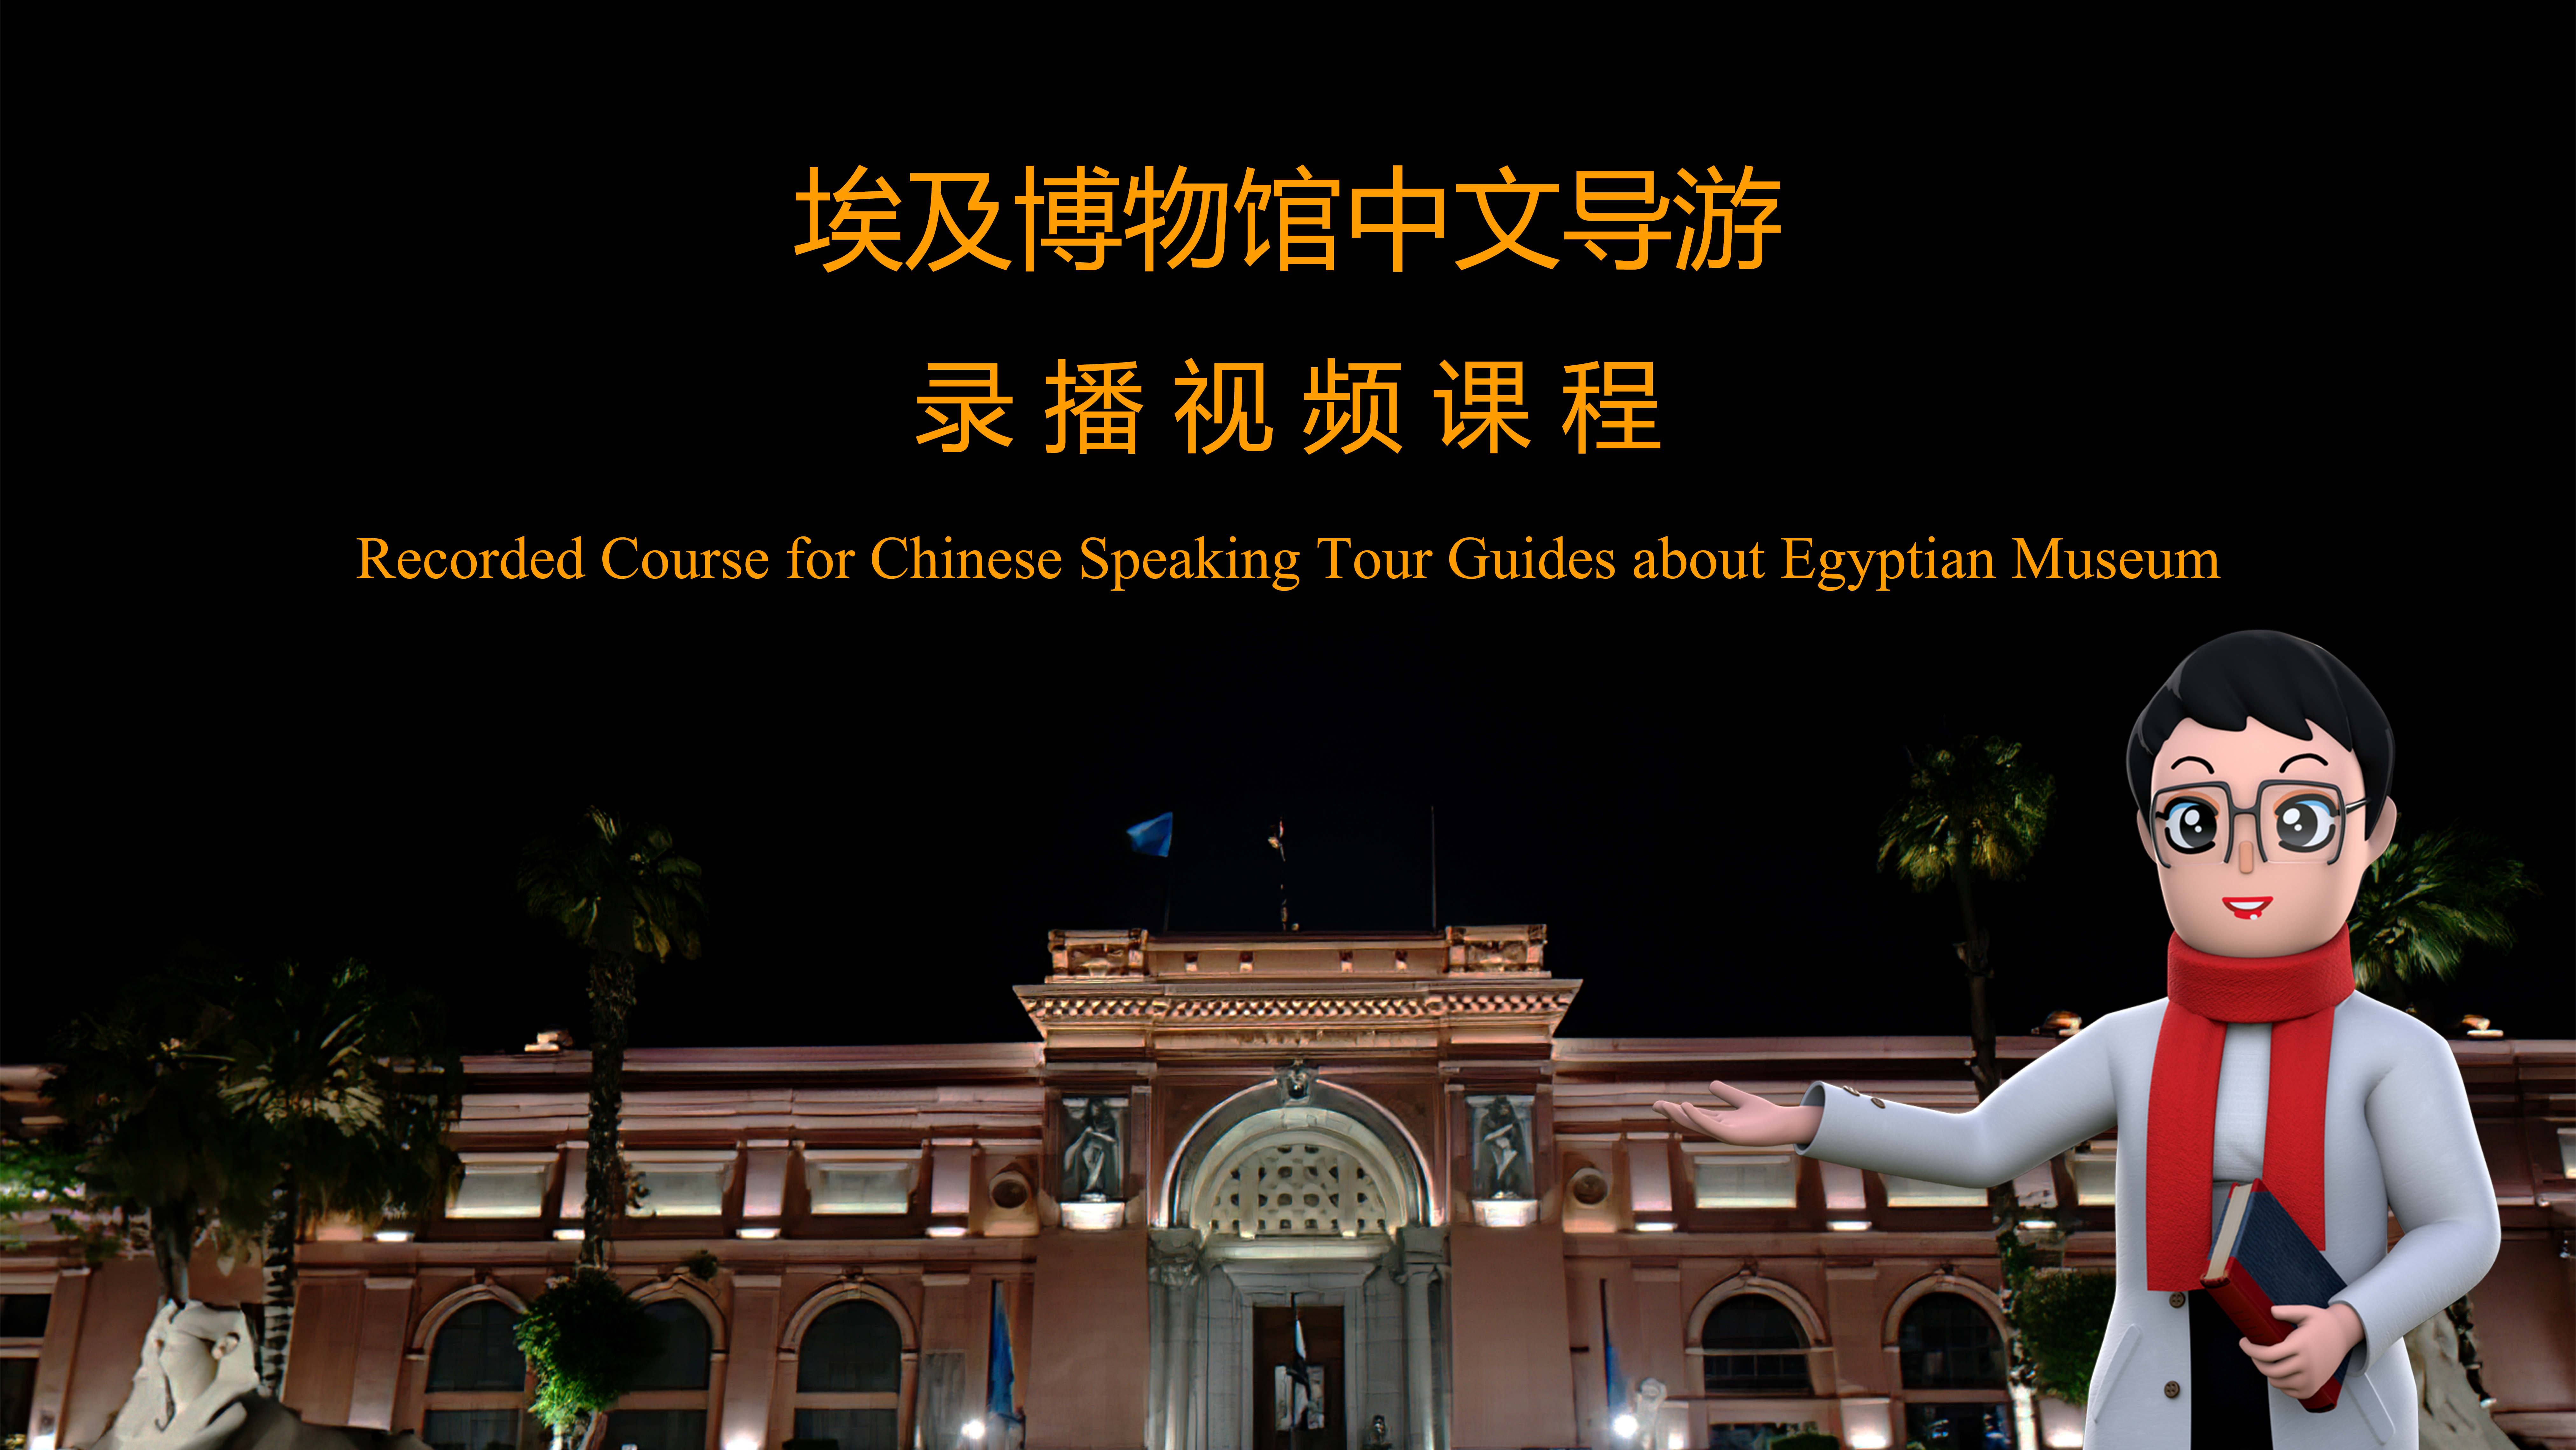 Recorded Course for Chinese Speaking Tour Guides about Egyptian Museum